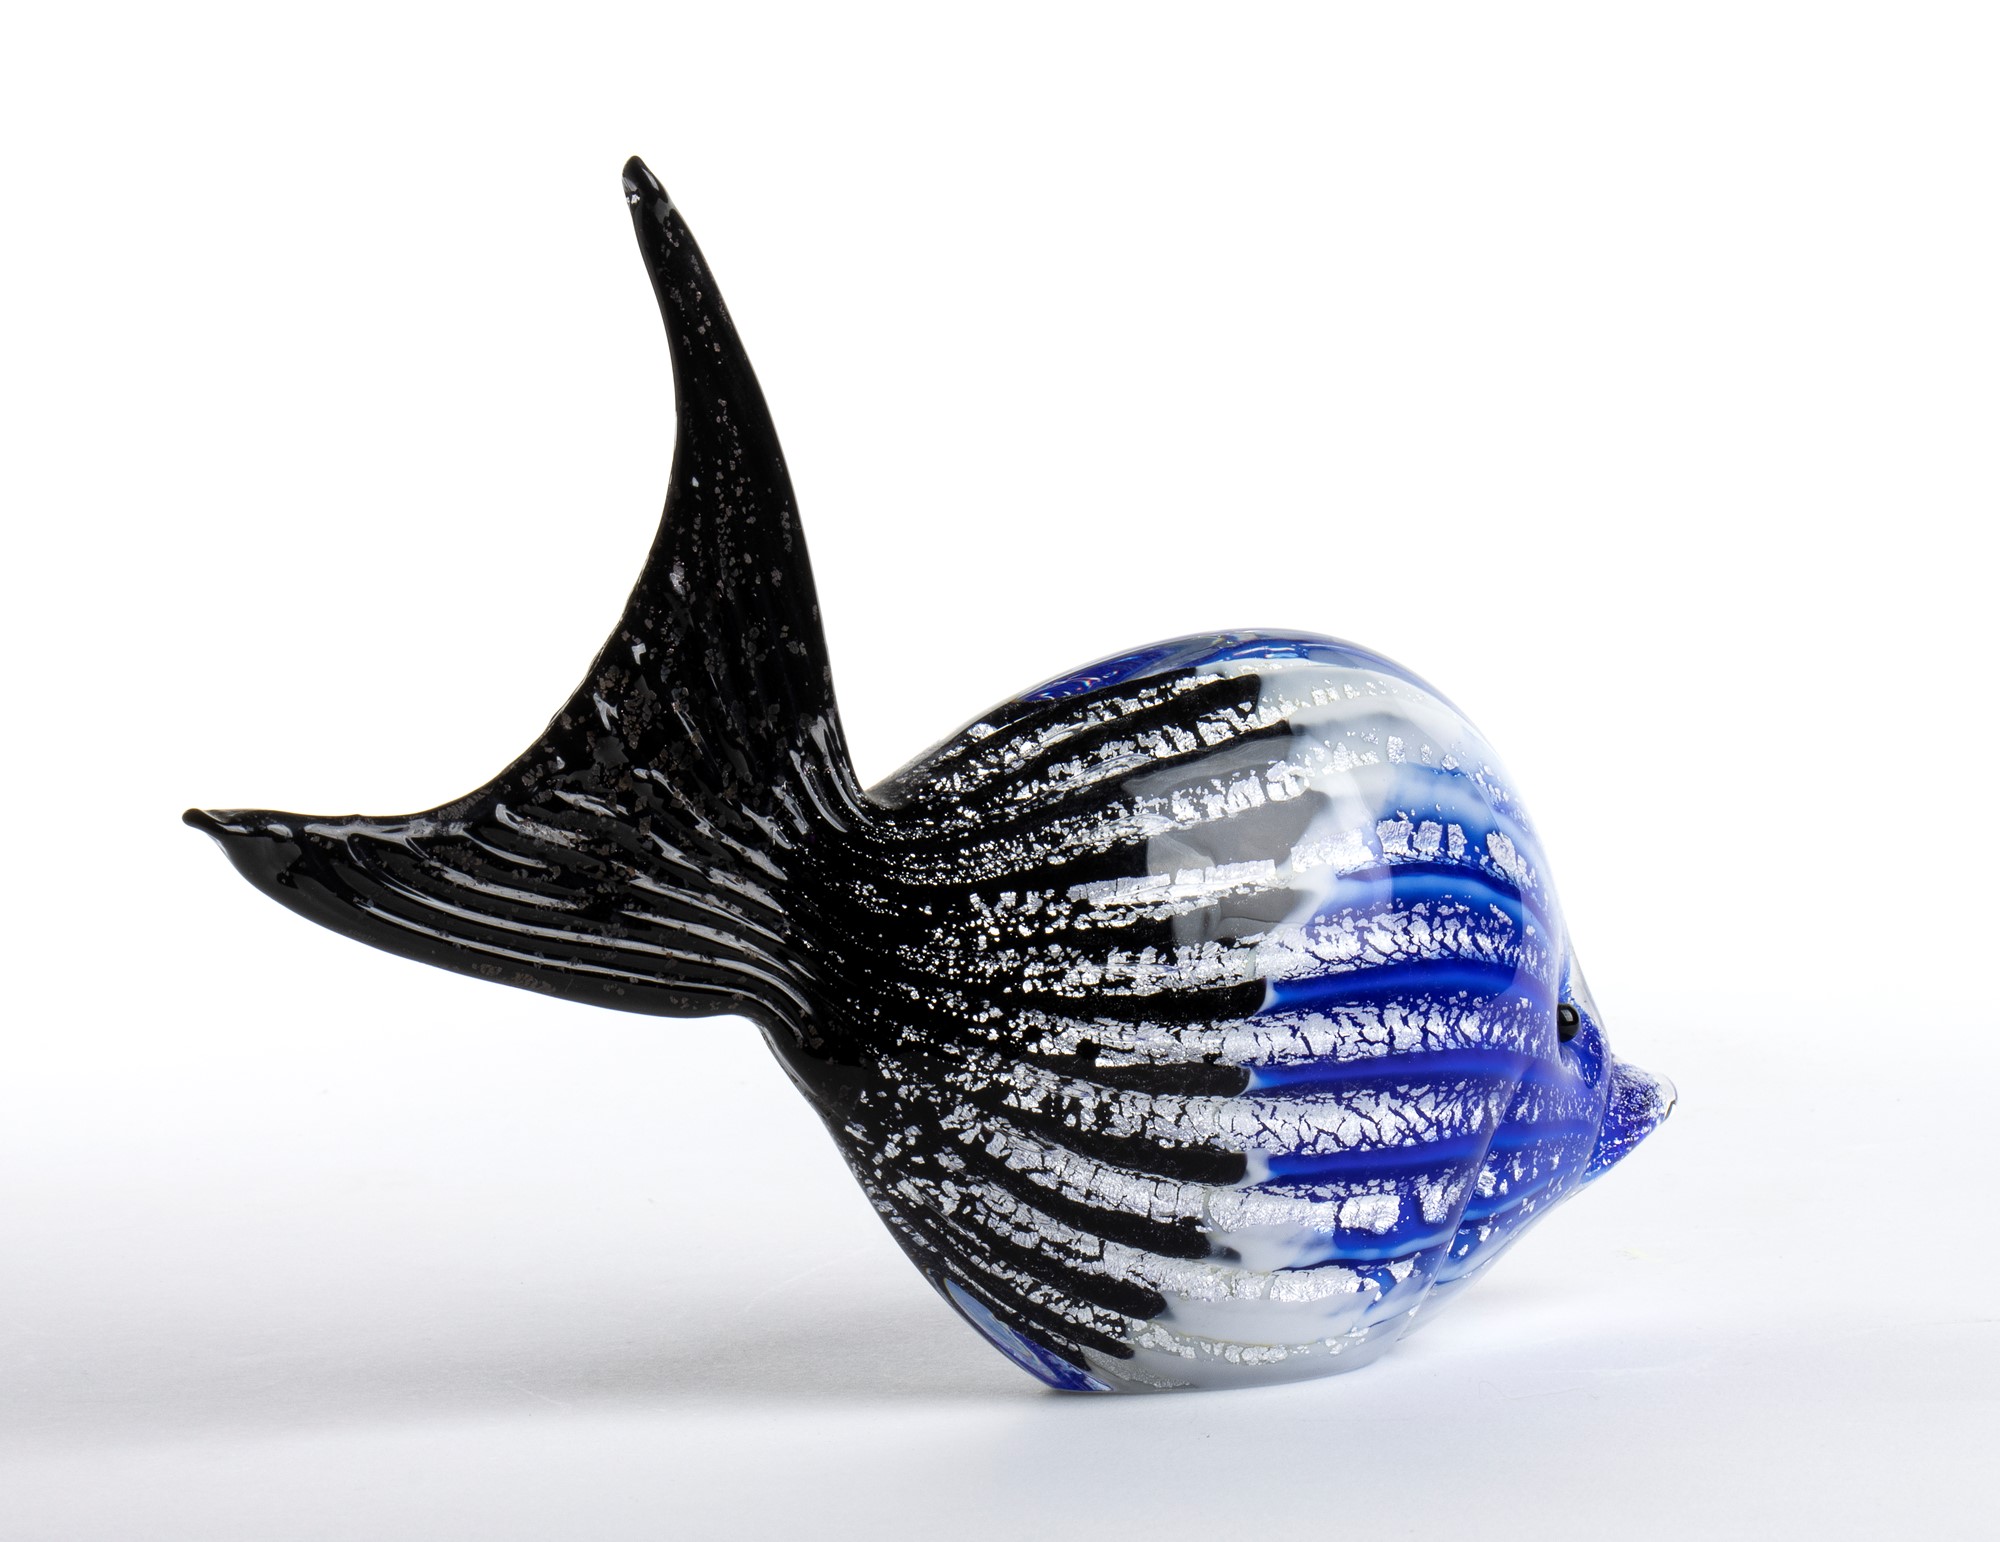 Small fish-shaped sculpture in Murano glass - Image 8 of 11